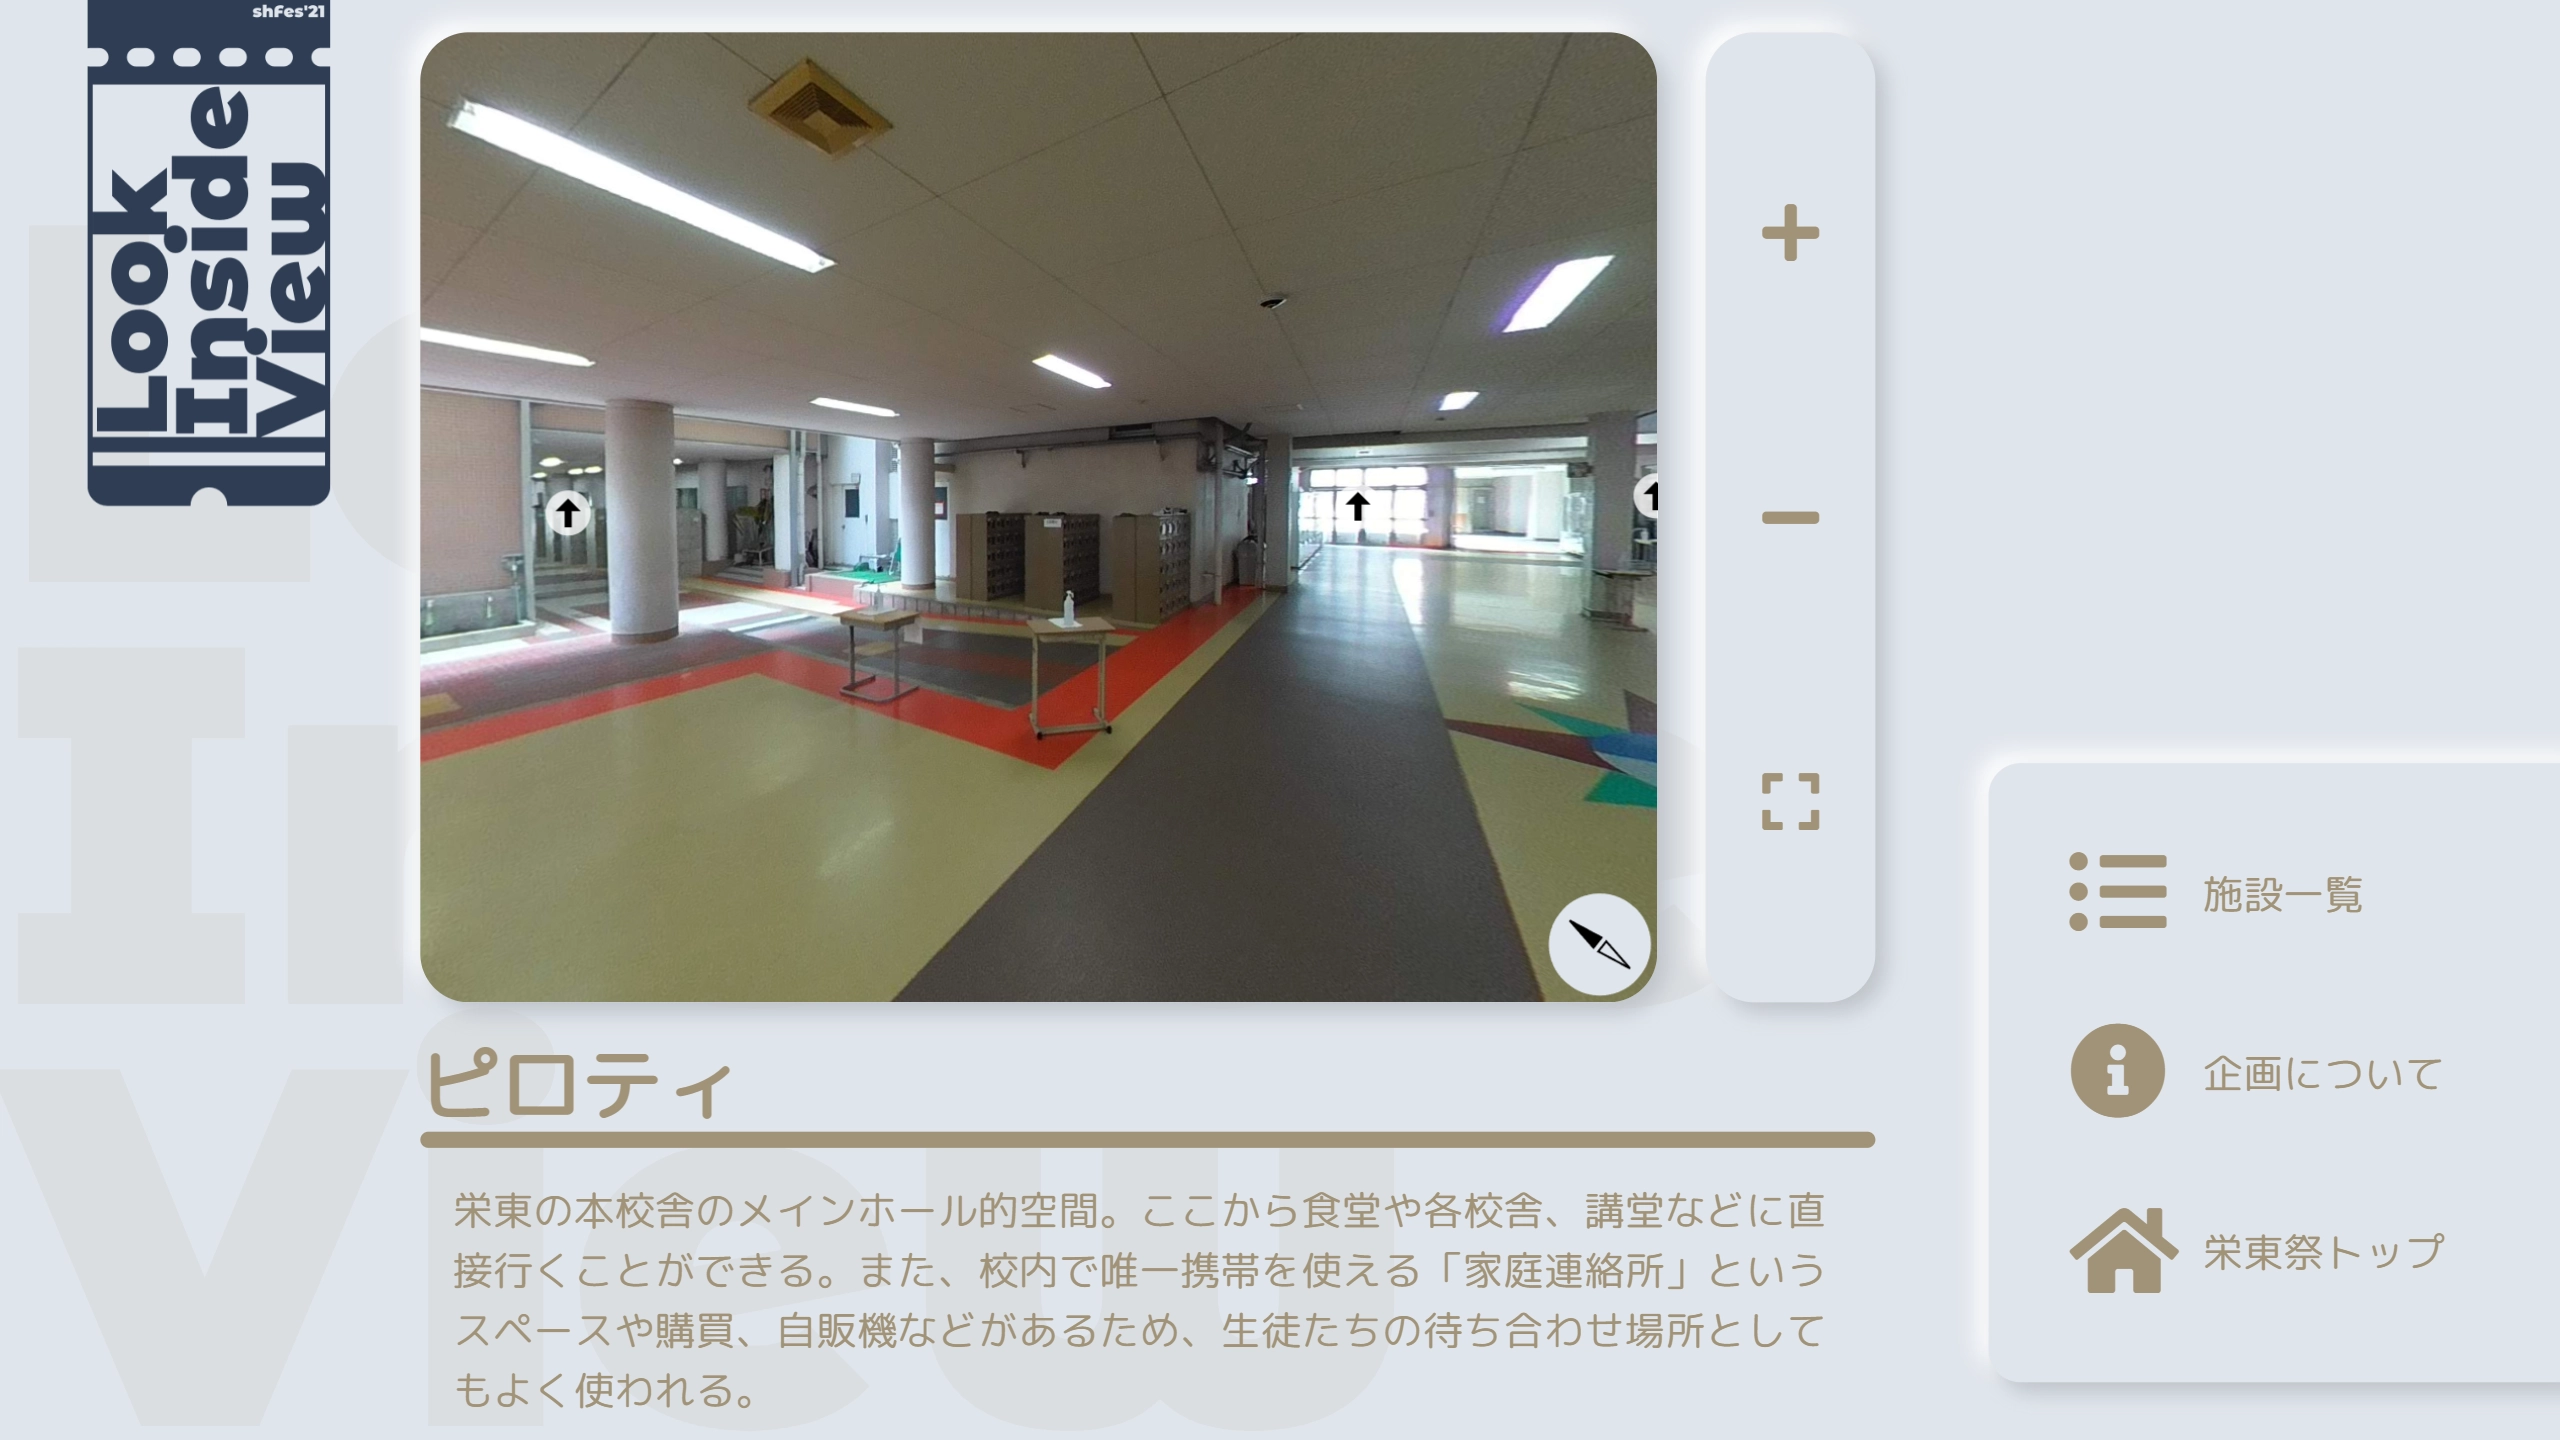 Look Inside Viewのサムネイル画像